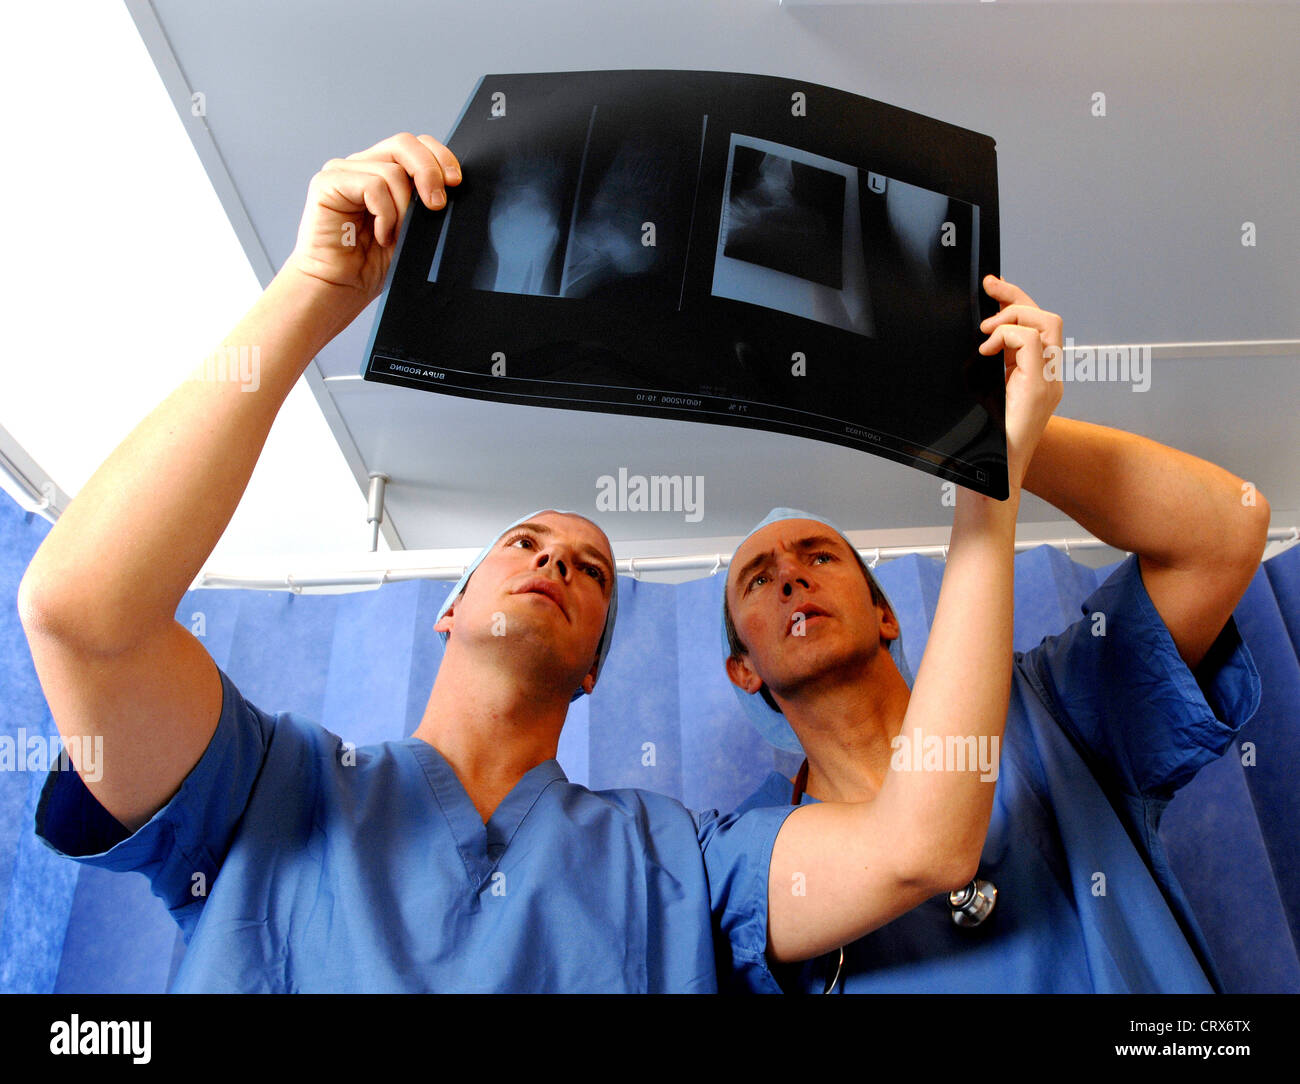 Two surgeons wearing blue surgical caps and gowns, reviewing a patient's x-ray. Stock Photo